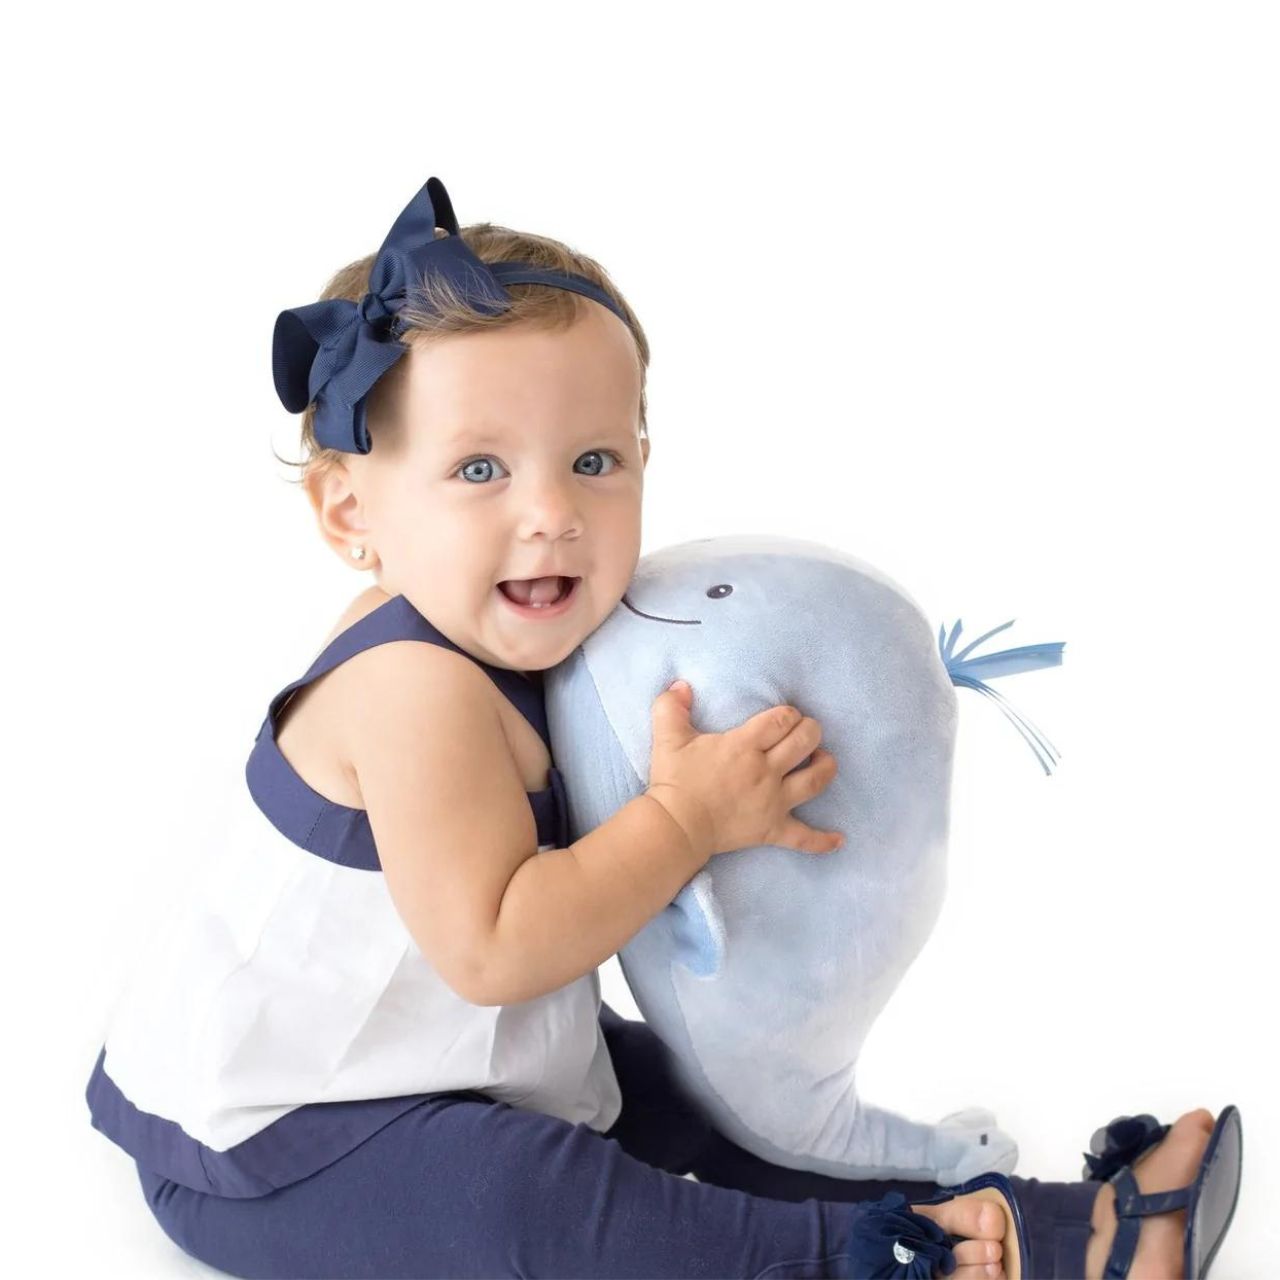 GUND Baby Sleepy Seas Light & Sound Whale  This musical plush toy will help your babies drift off to sleep. The whale is presented in an oh-so-soft light blue fabric, with blue ribbons for its hair, and dark embroidery creating a smiling face. Press the left fin and the animated whale splashes into life. 